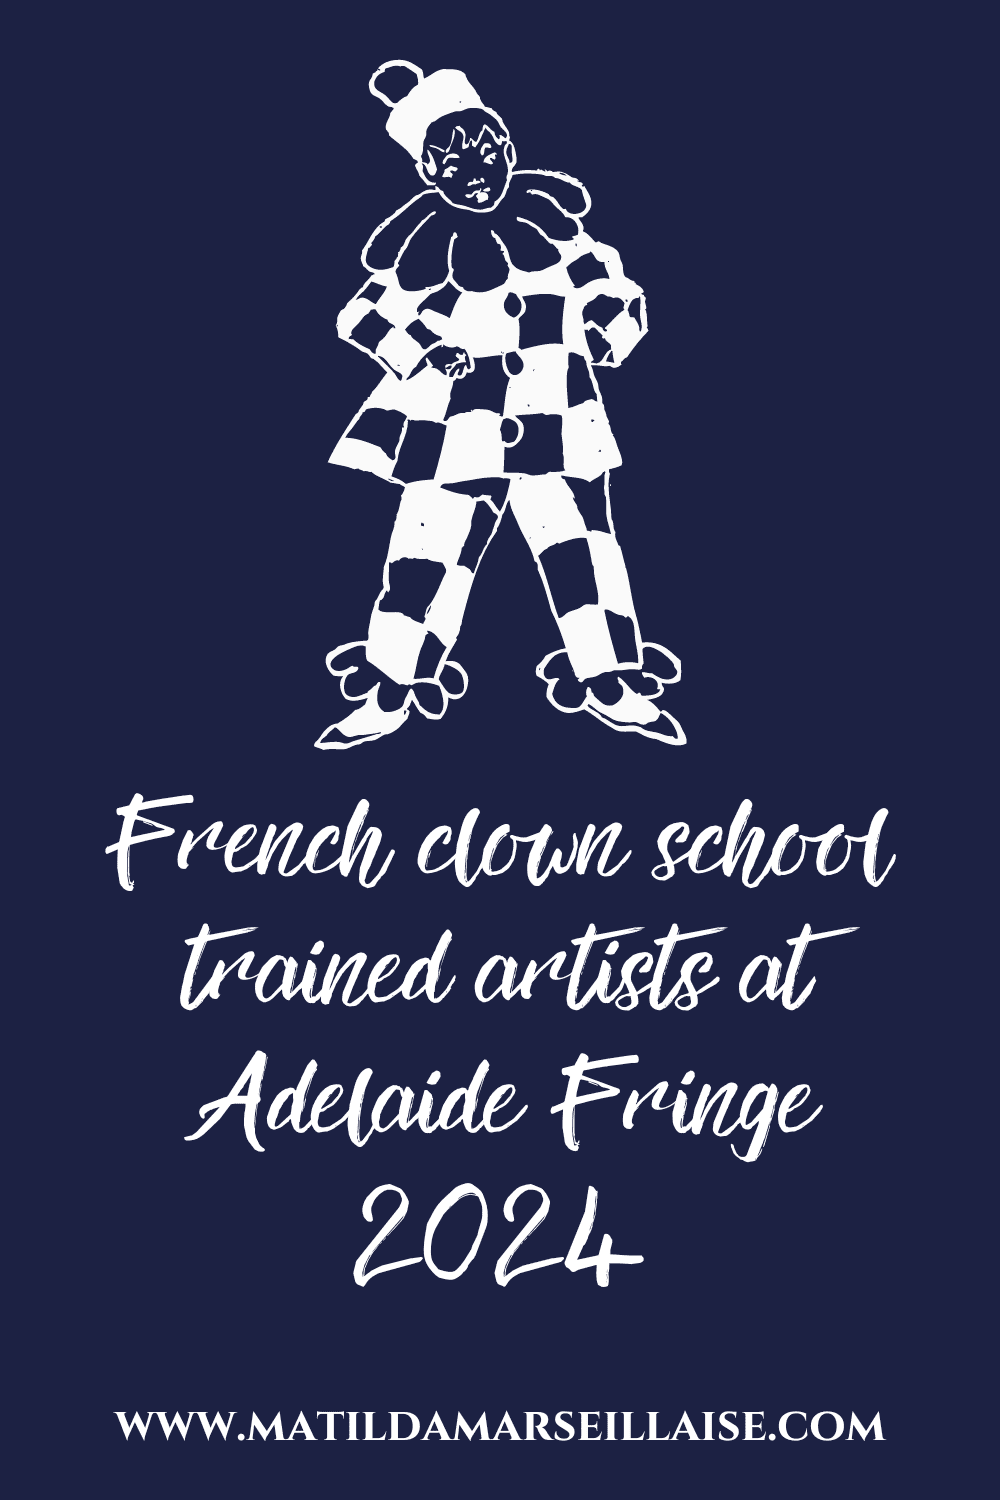 Discover 23 Adelaide Fringe 2024 shows from performers with French training at clown schools